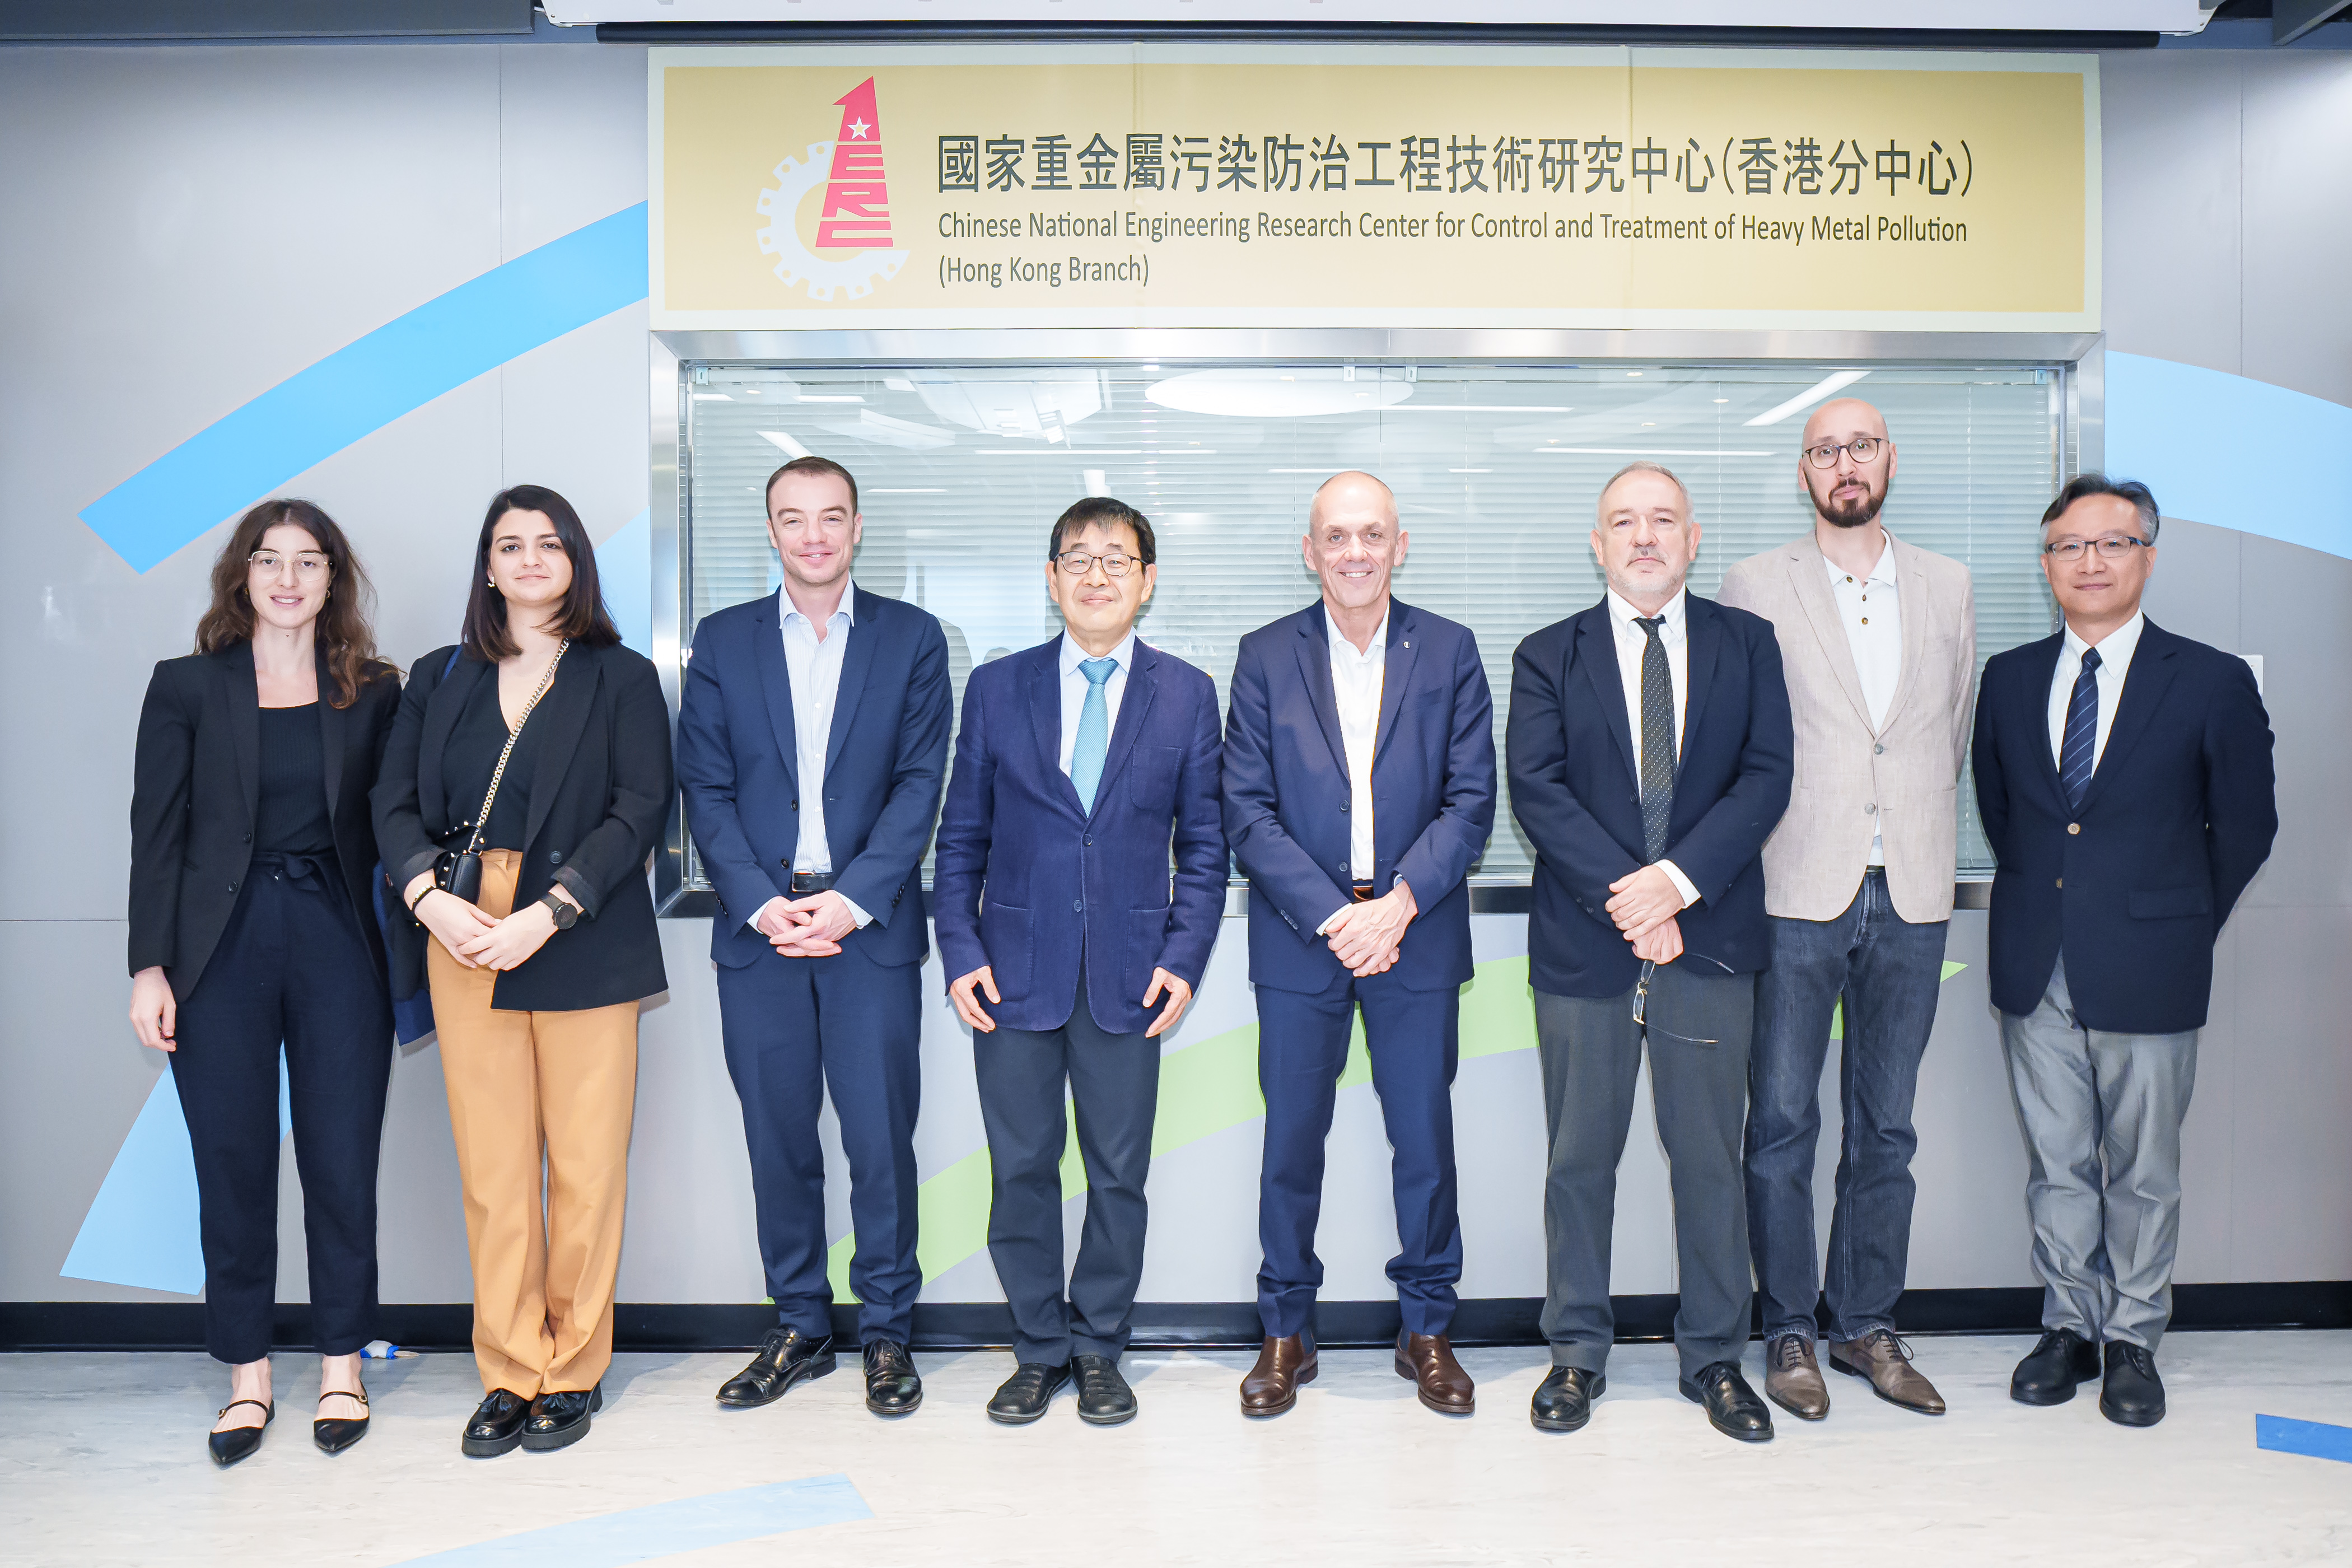 Delegation from CNRS visited the Chinese National Engineering Research Center for Control and Treatment of Heavy Metal Pollution.